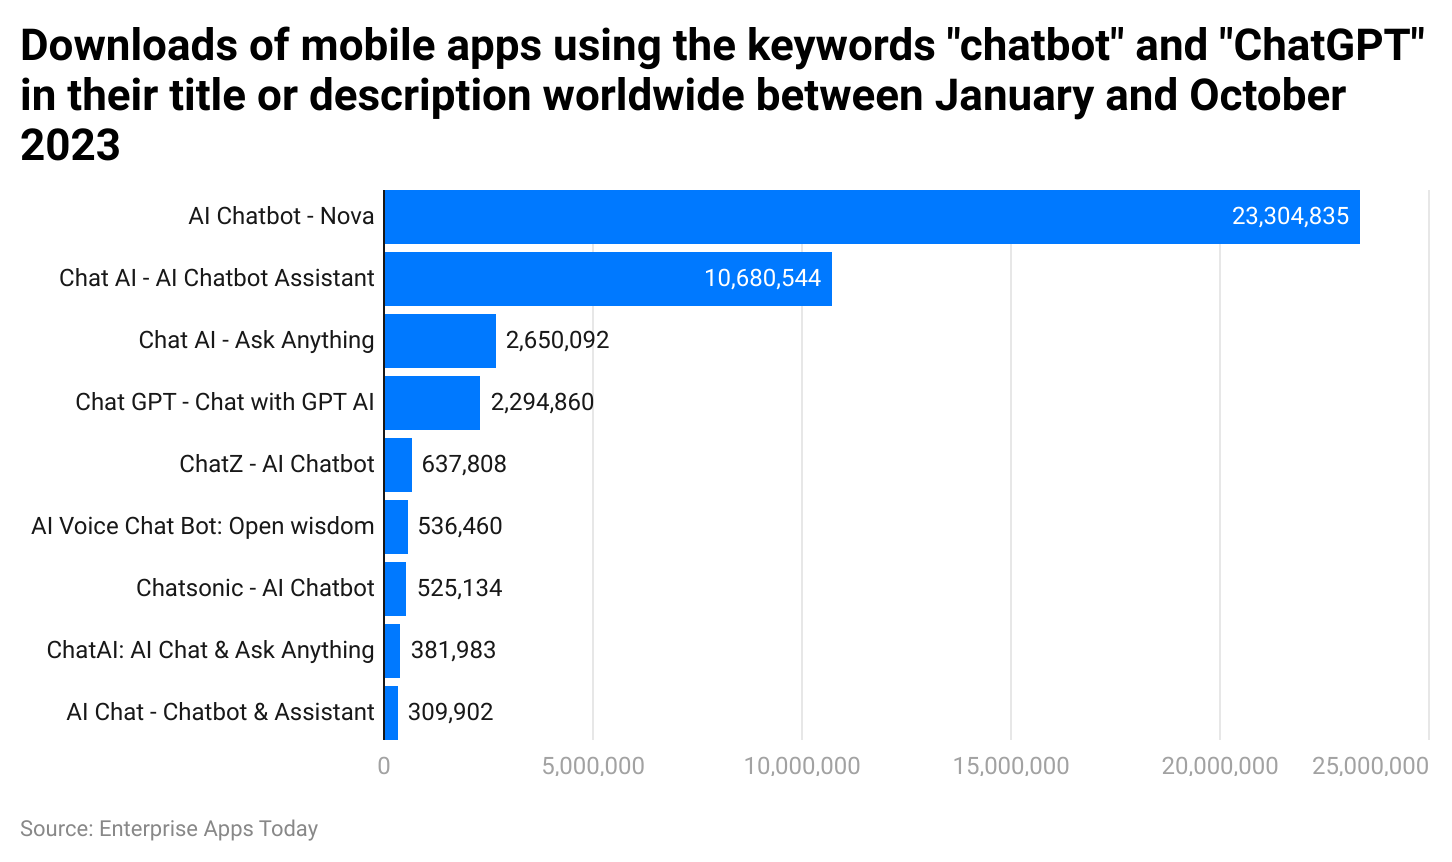 downloads-of-mobile-apps-using-the-keywords-chatbot-and-chatgpt-in-their-title-or-description-worldwide-between-january-and-october-2023.